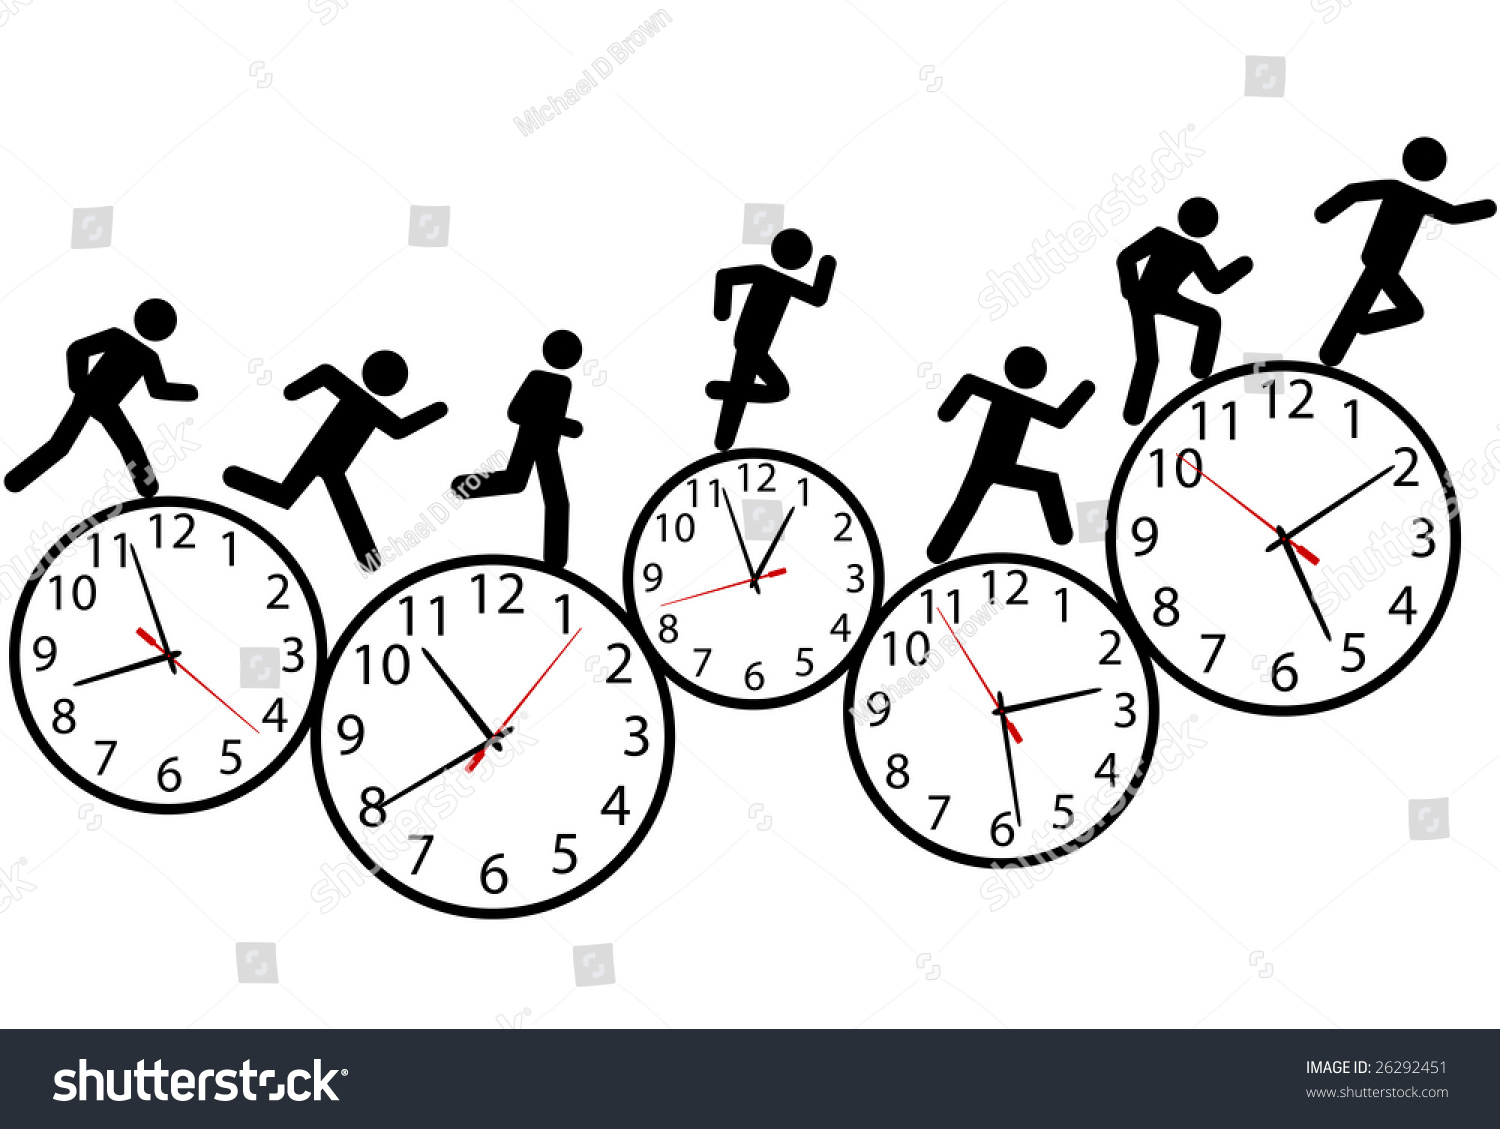 clipart racing the clock - photo #9